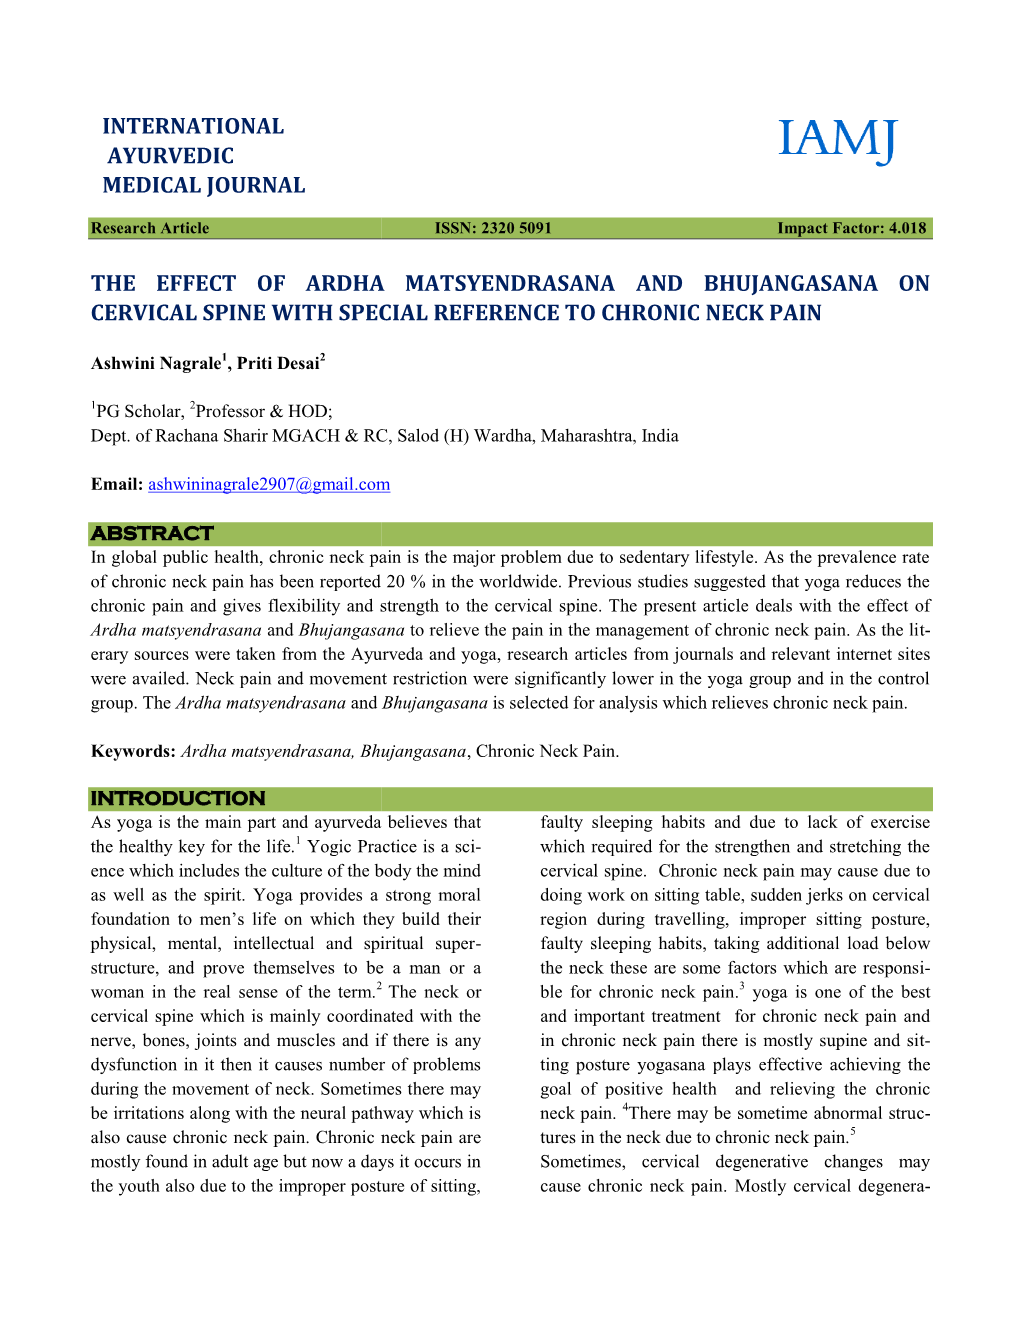 The Effect of Ardha Matsyendrasana and Bhujangasana on Cervical Spine with Special Reference to Chronic Neck Pain